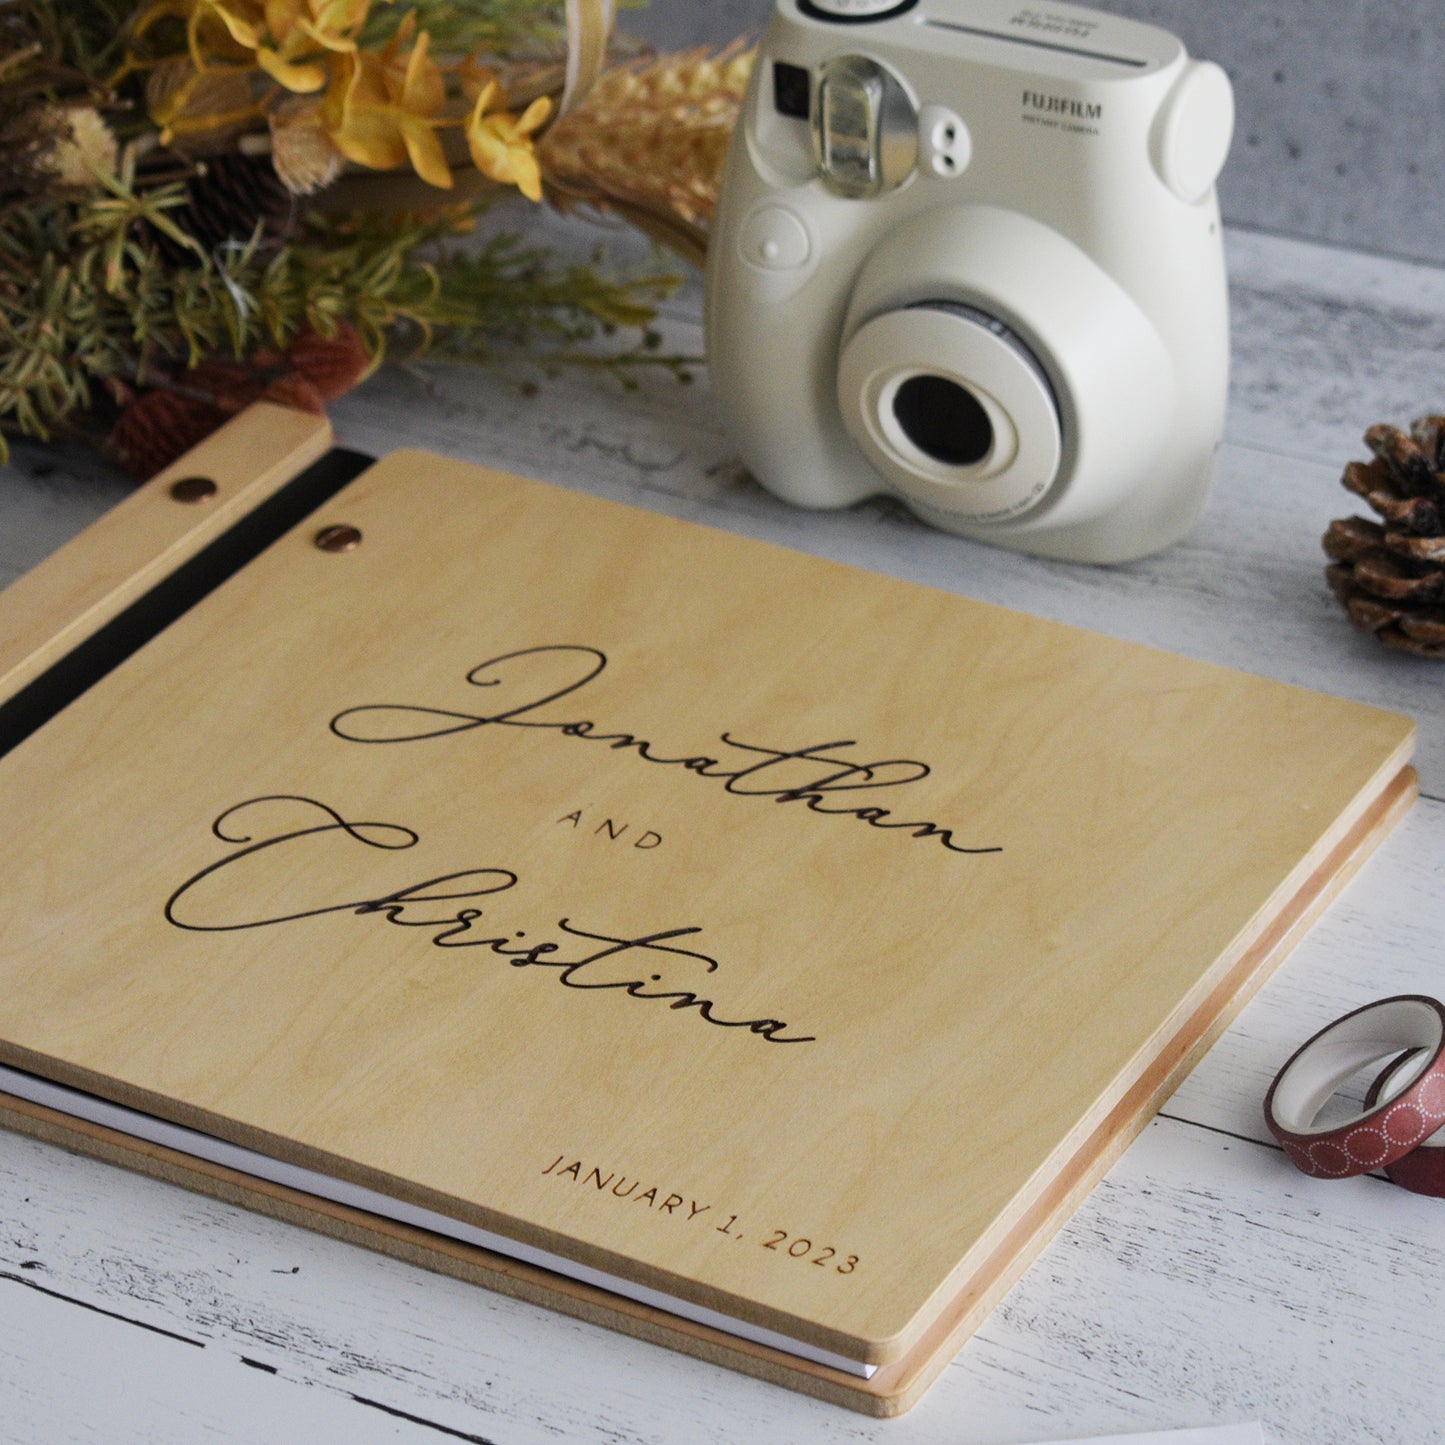 An 8.5x11" guest book lies on a table. Made of maple wood, black vegan leather binding, and copper hardware. The front cover reads “Jonathan and Christina, January 1, 2023.” 